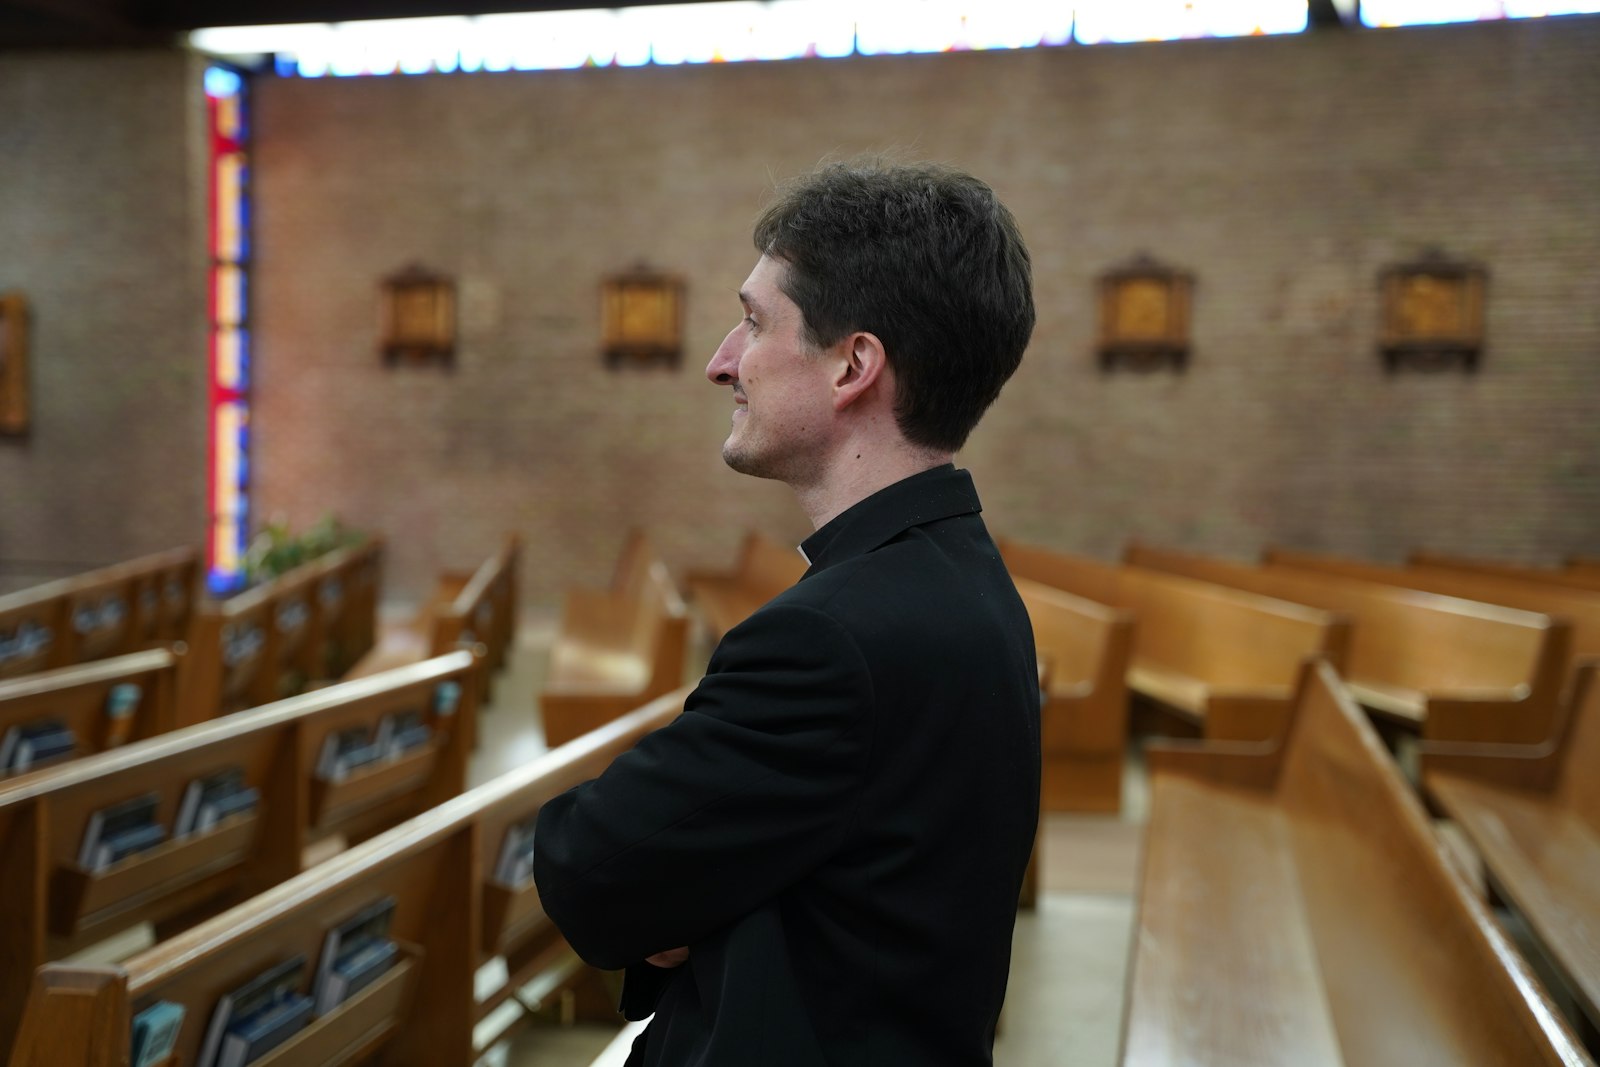 "I remember this peace I had when I made the decision, the confidence I had. I didn’t want to wait," Fr. Shackett said. "Once you know this is what God wants for you, you can’t wait.”